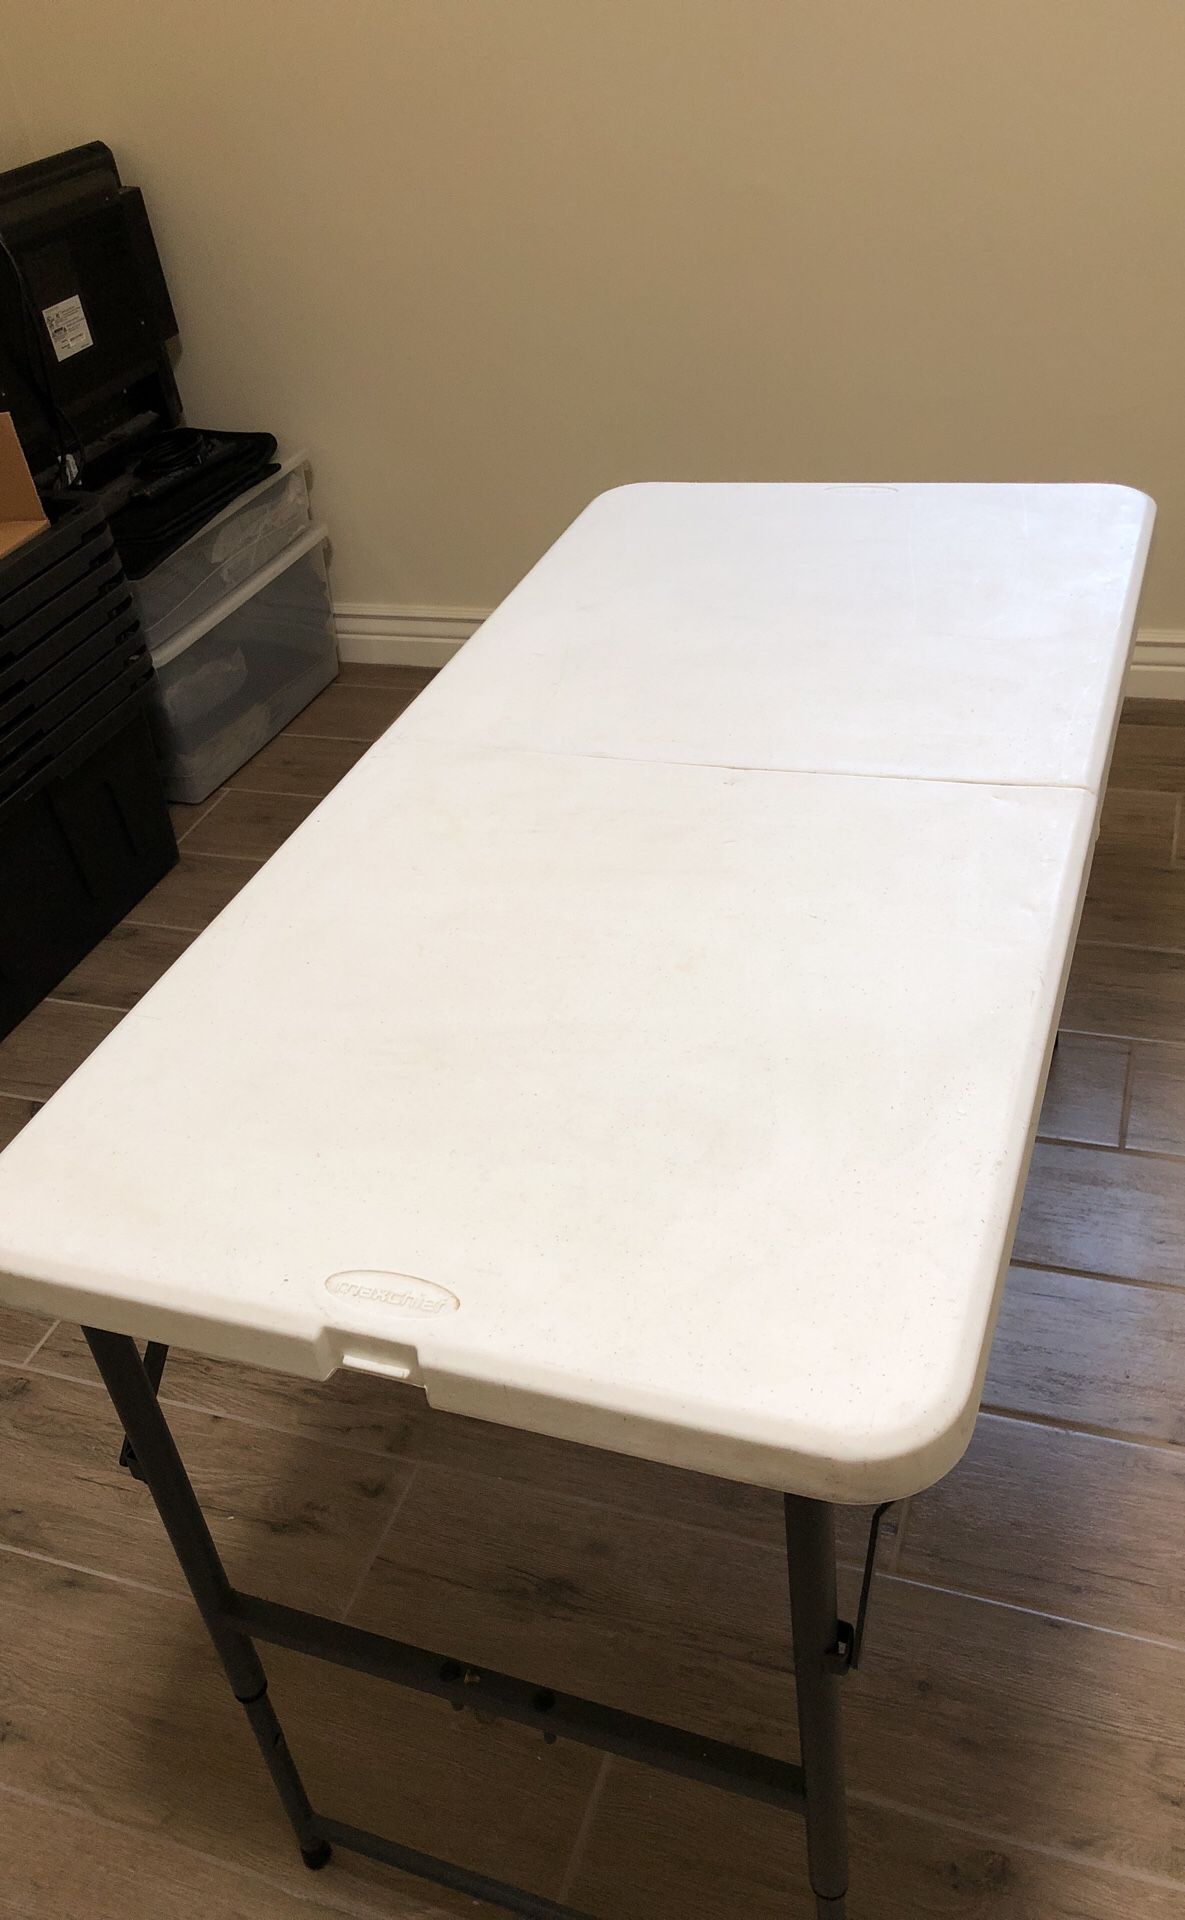 Alluring maxchief tables Maxchief 4 Adjustable Height Fold In Half Table For Sale Tempe Az Offerup